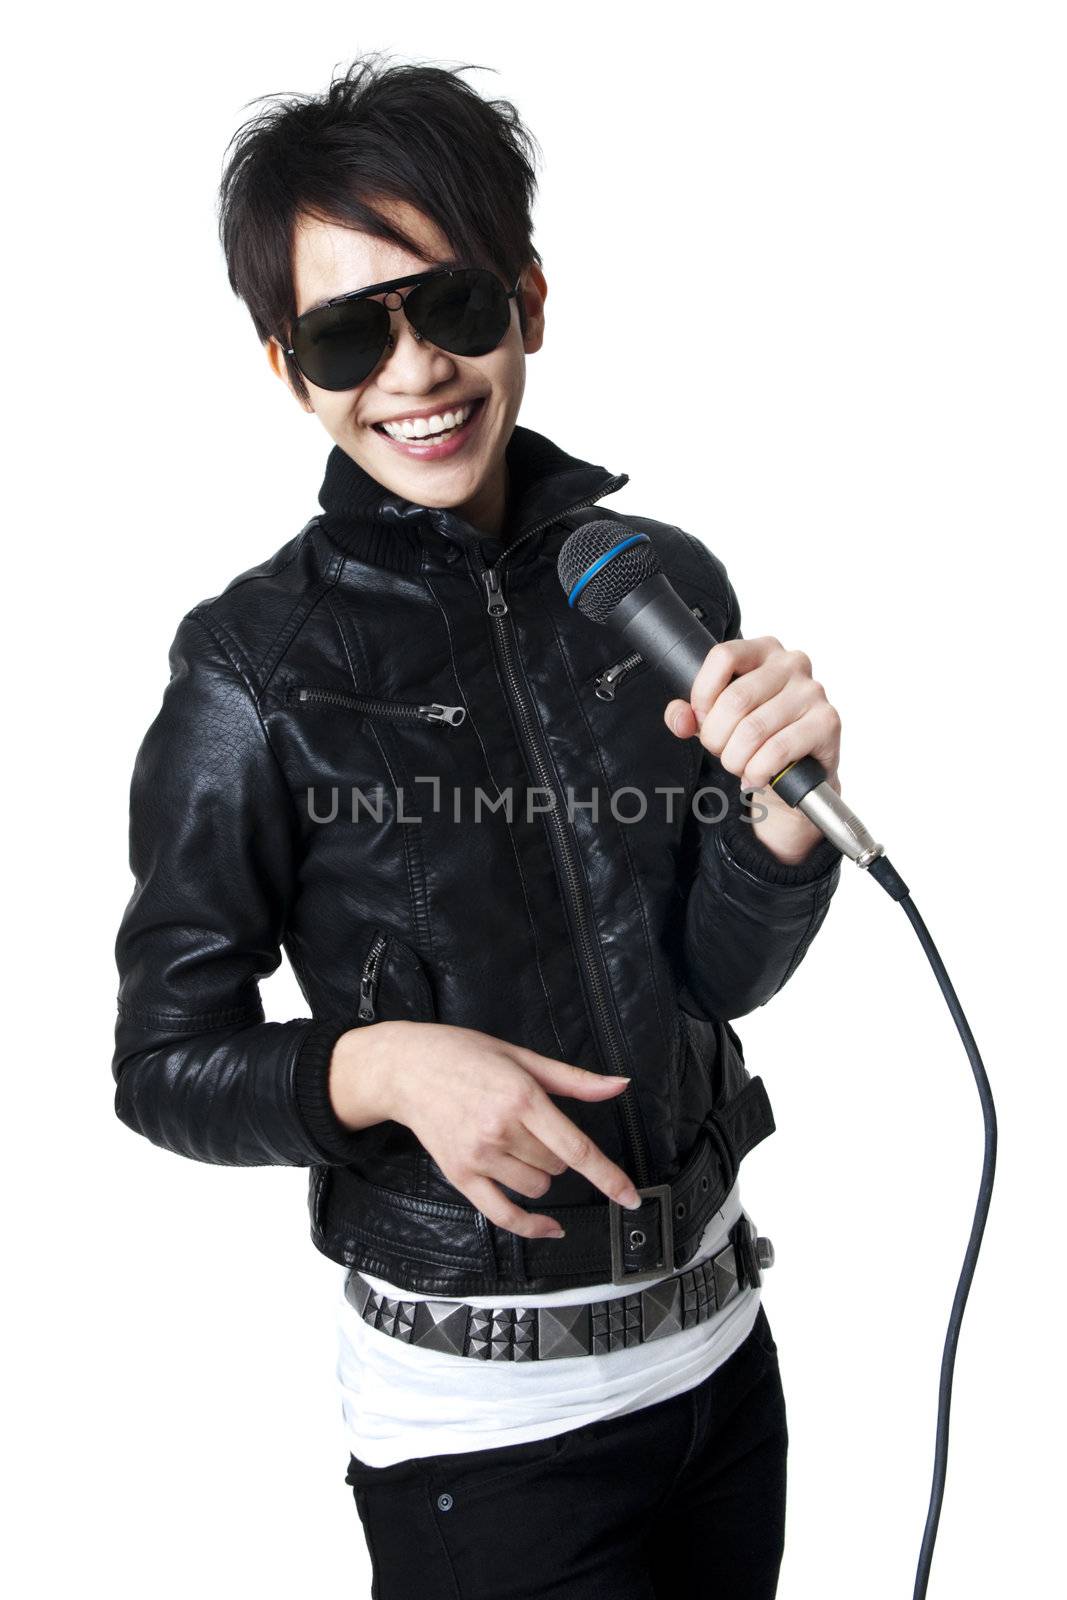 Asian rock singer in performance, isolated on white.